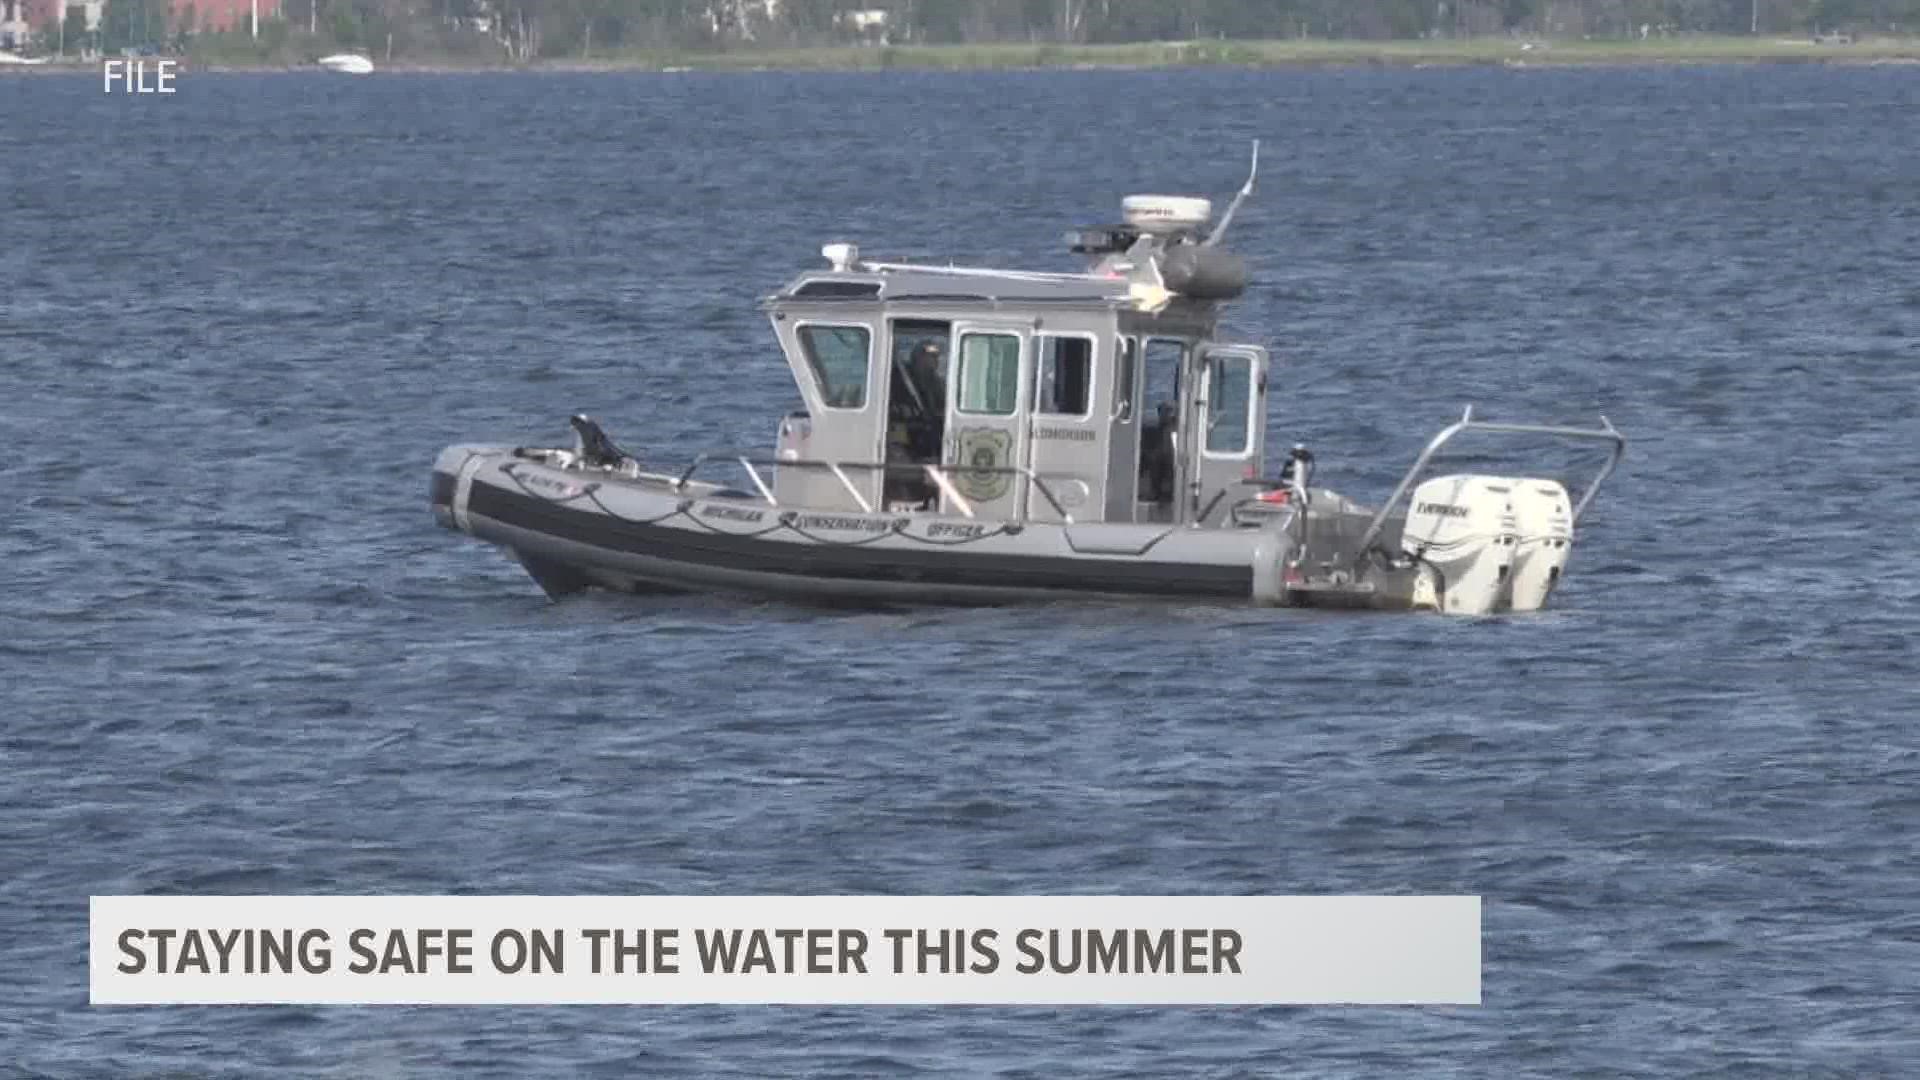 Meteorologist Michael Behrens met with the Coast Guard to brush up on boating safety tips ahead of the summer.